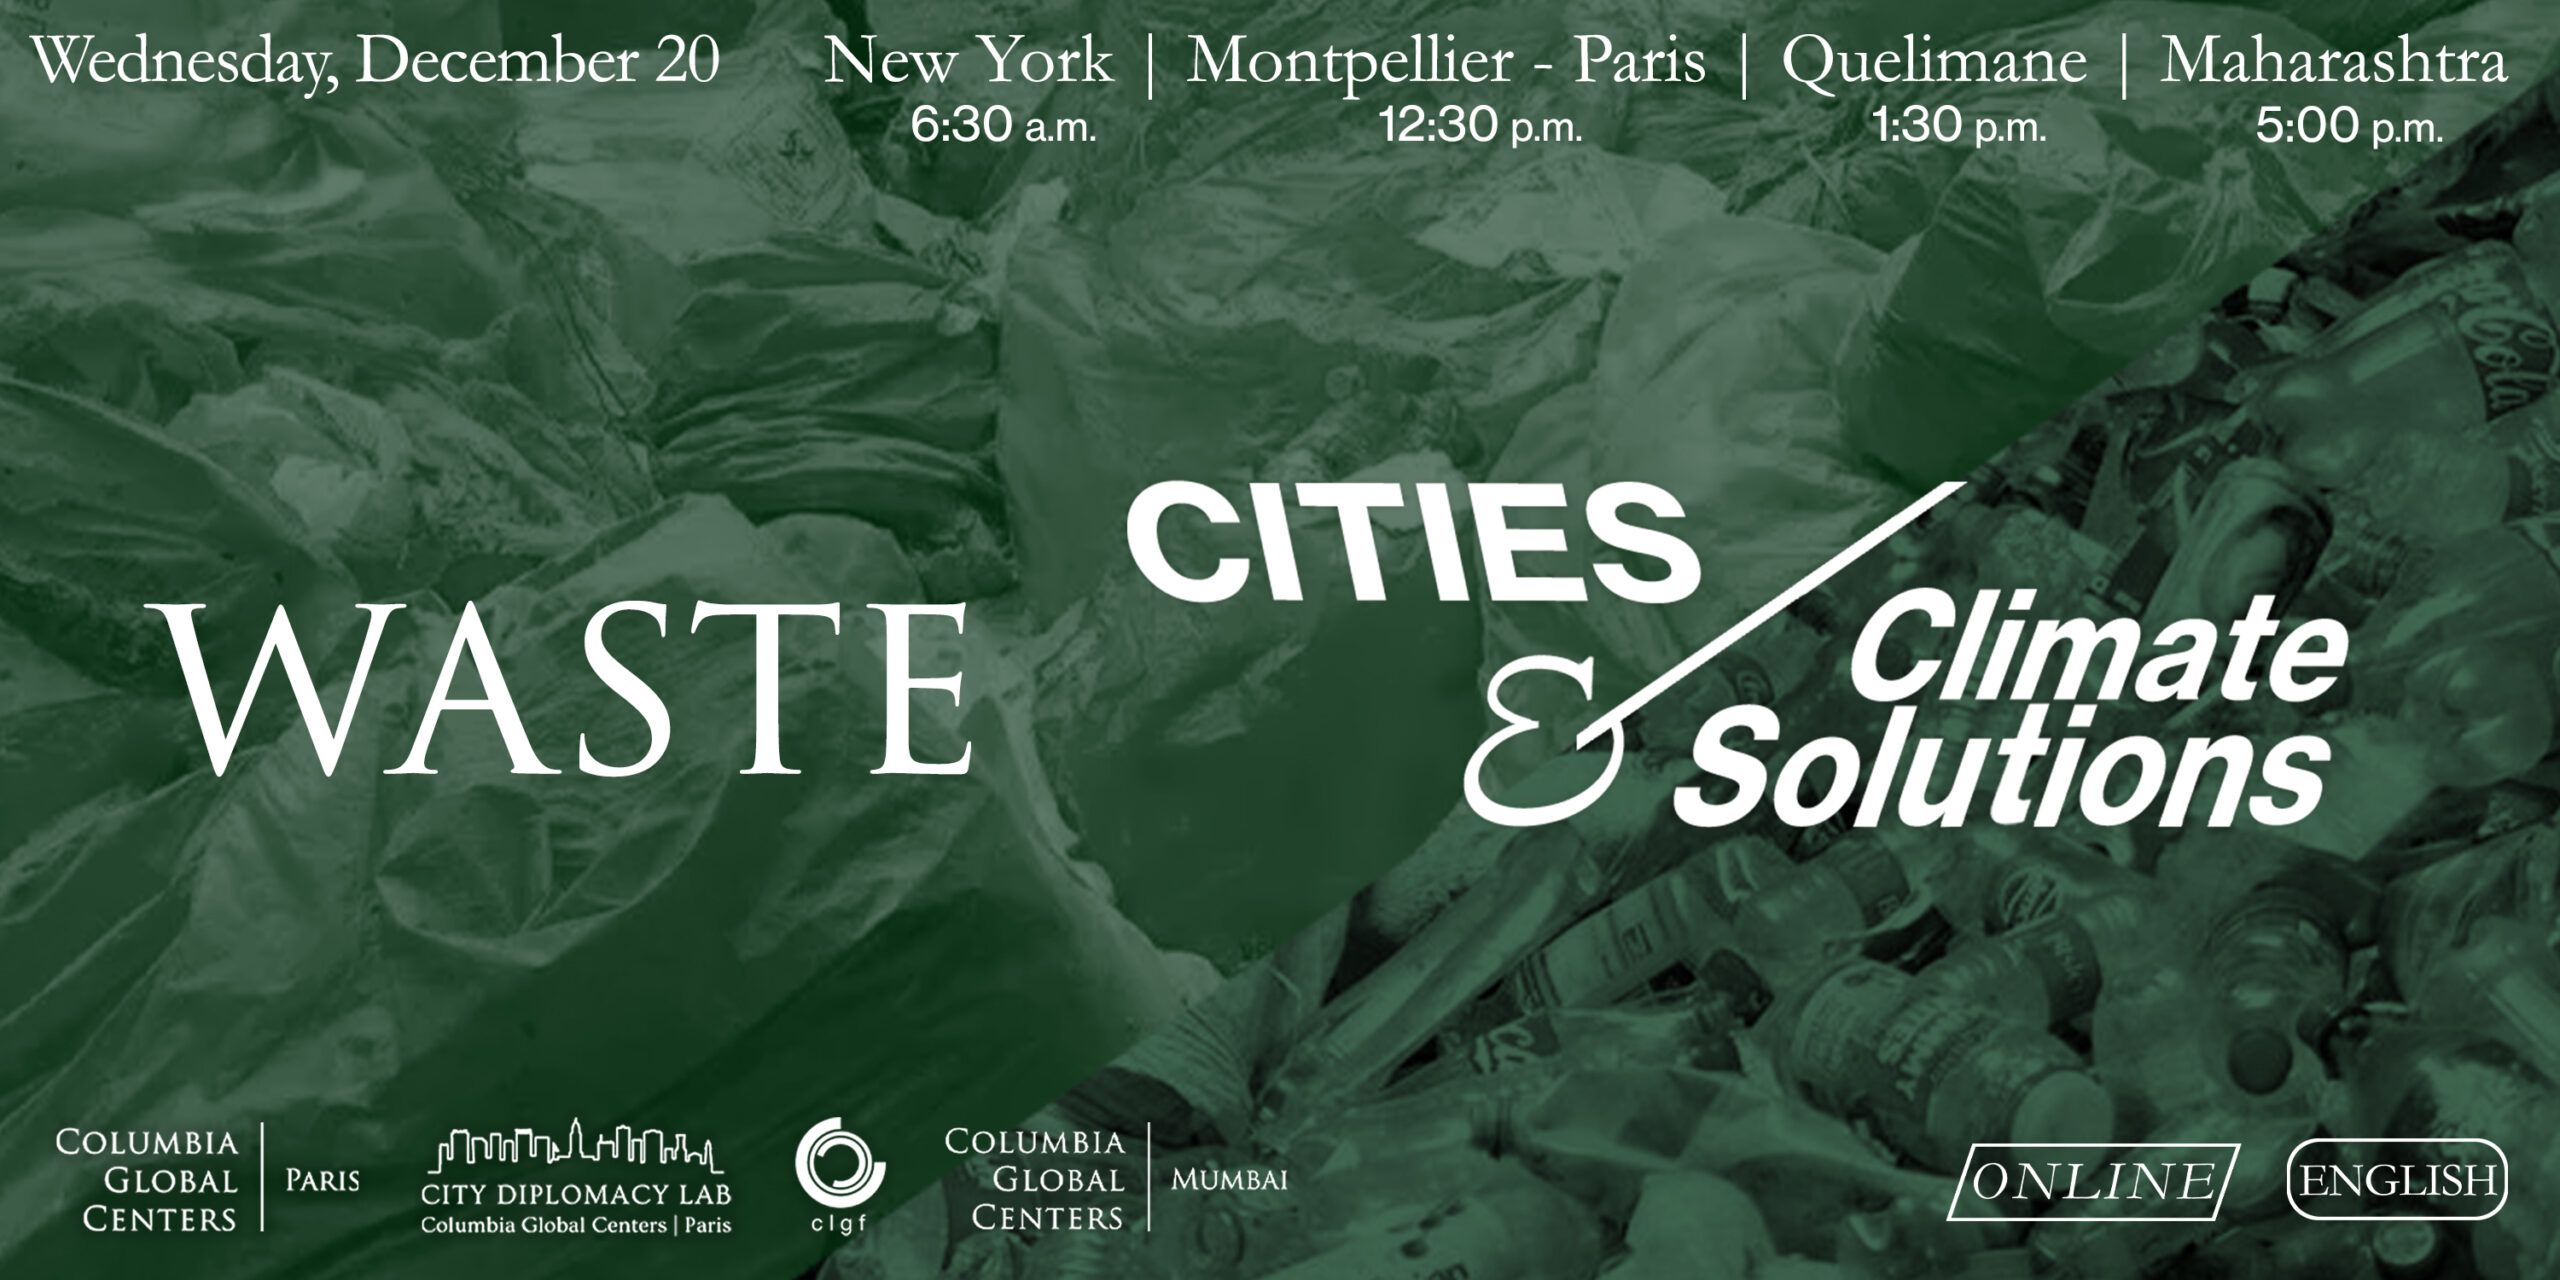 Cities and Climate Solutions | Waste